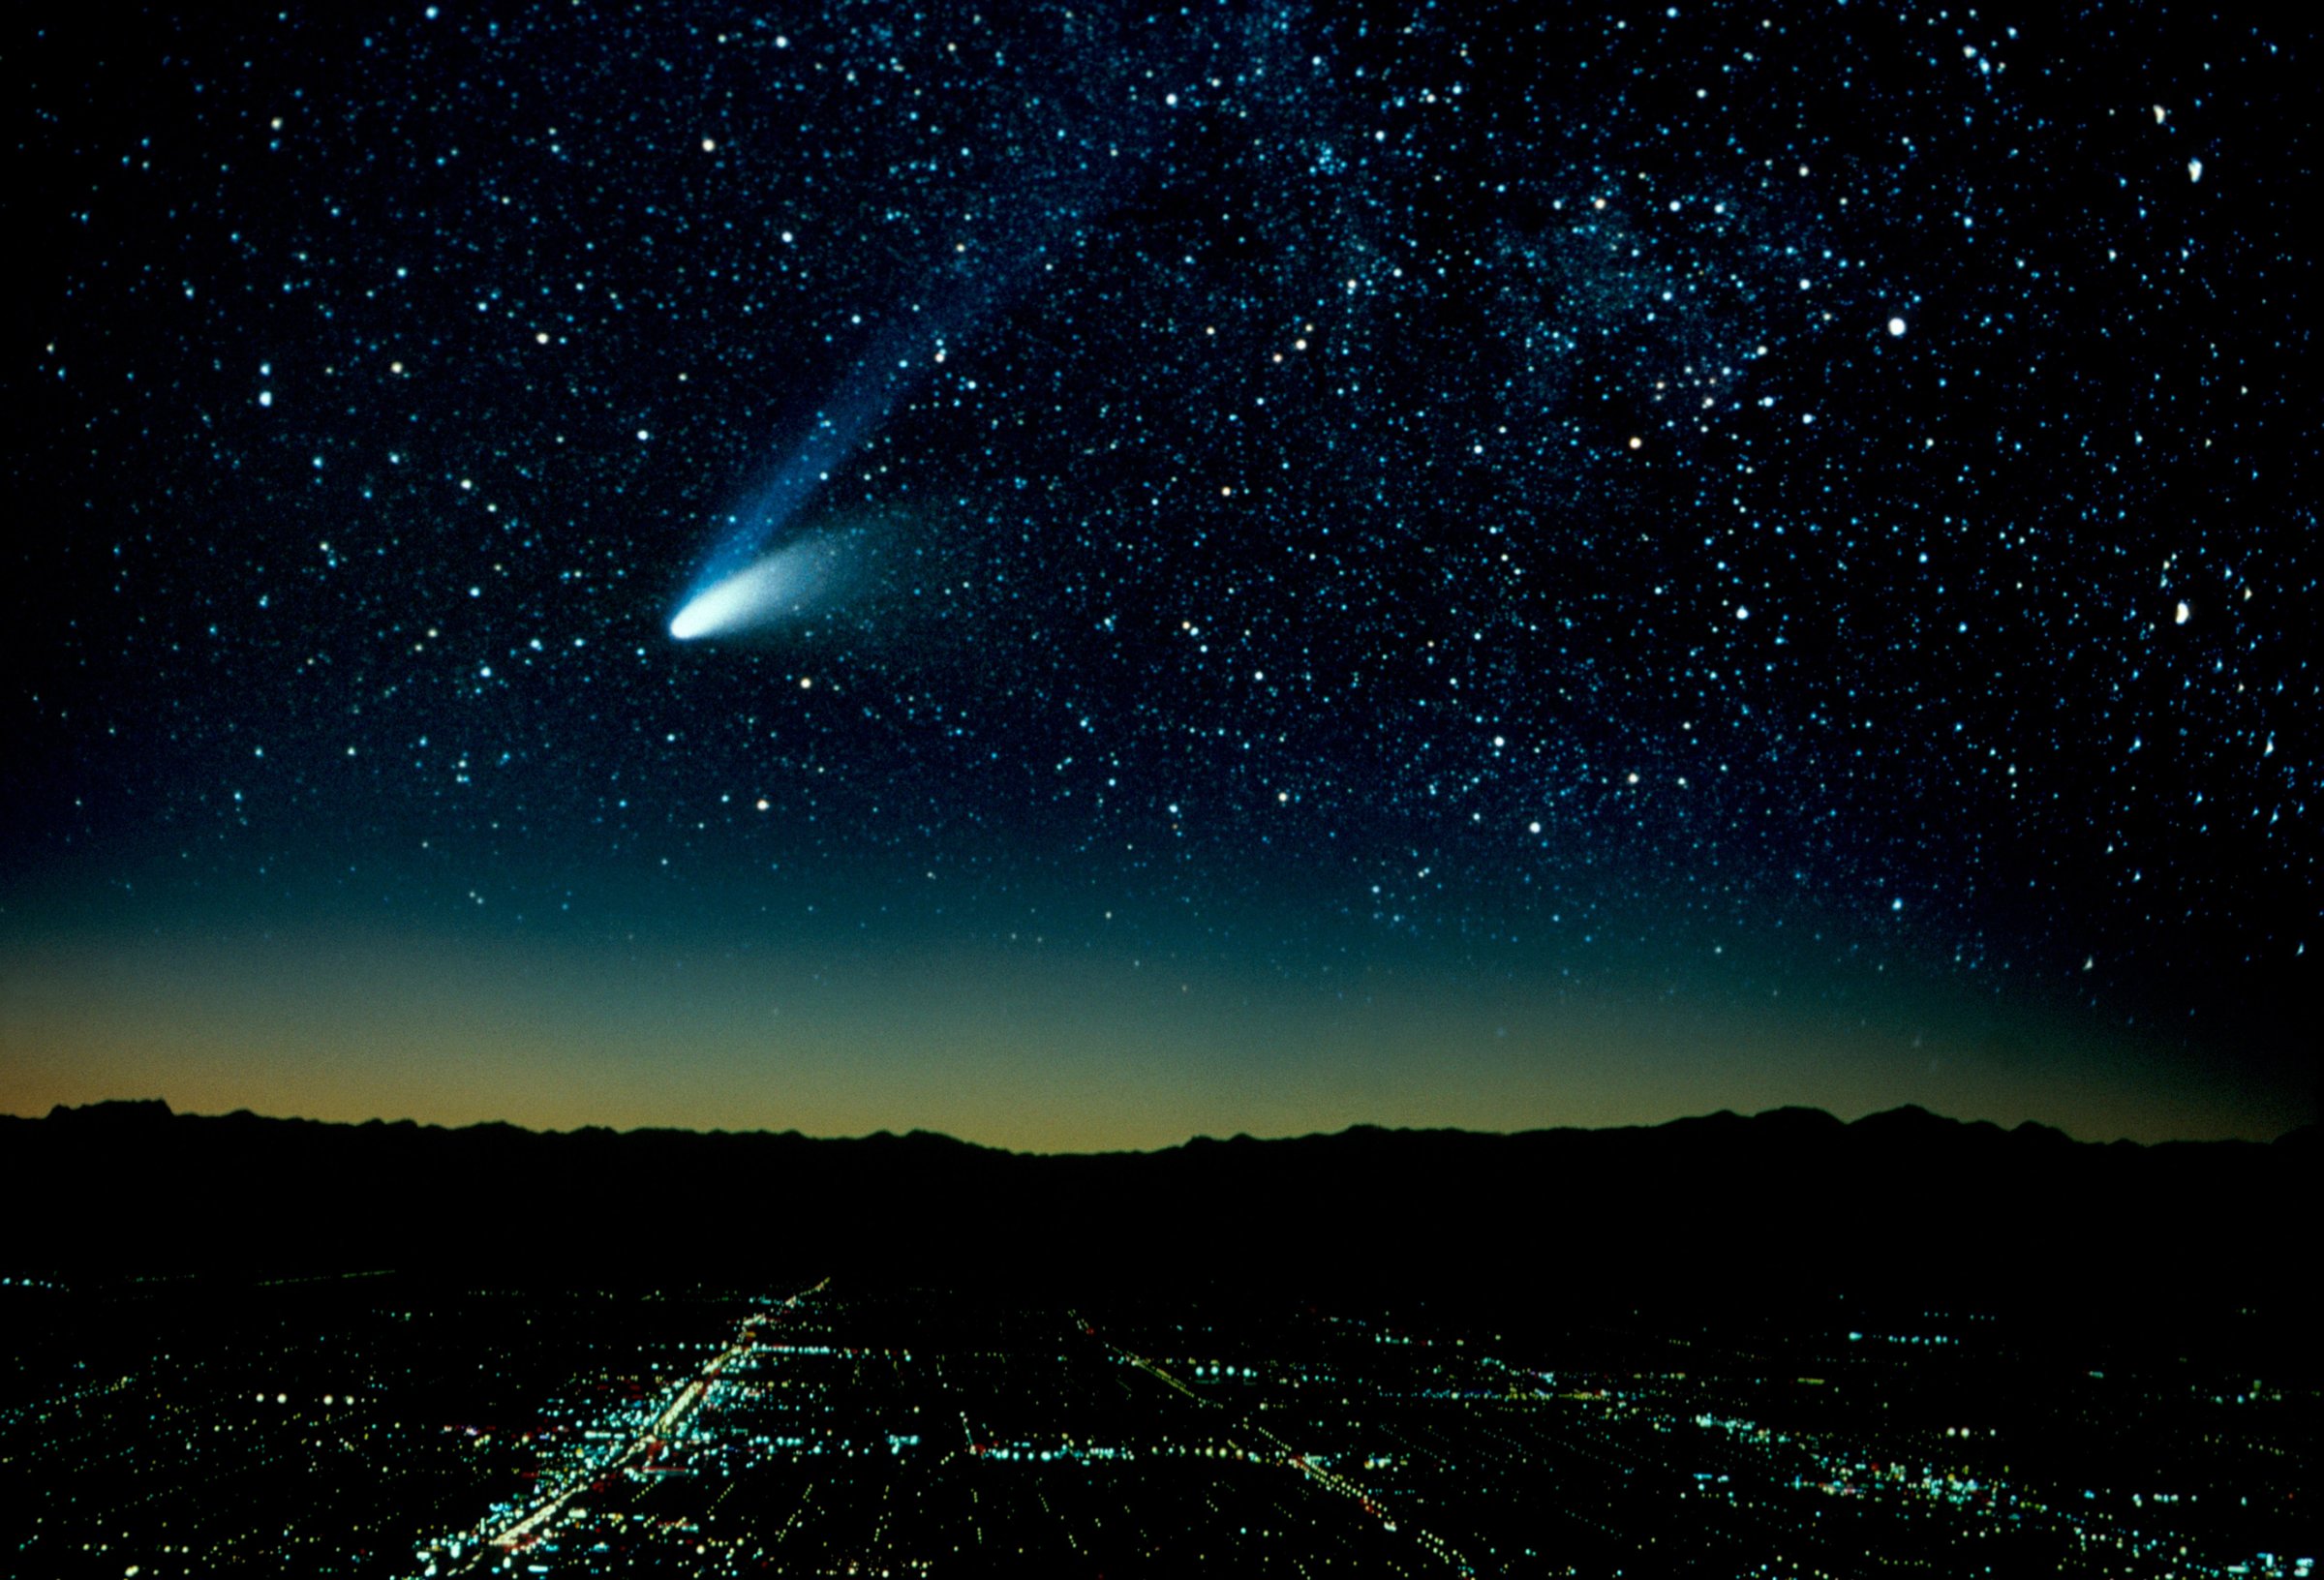 Hale-Bopp Comet And City At Night